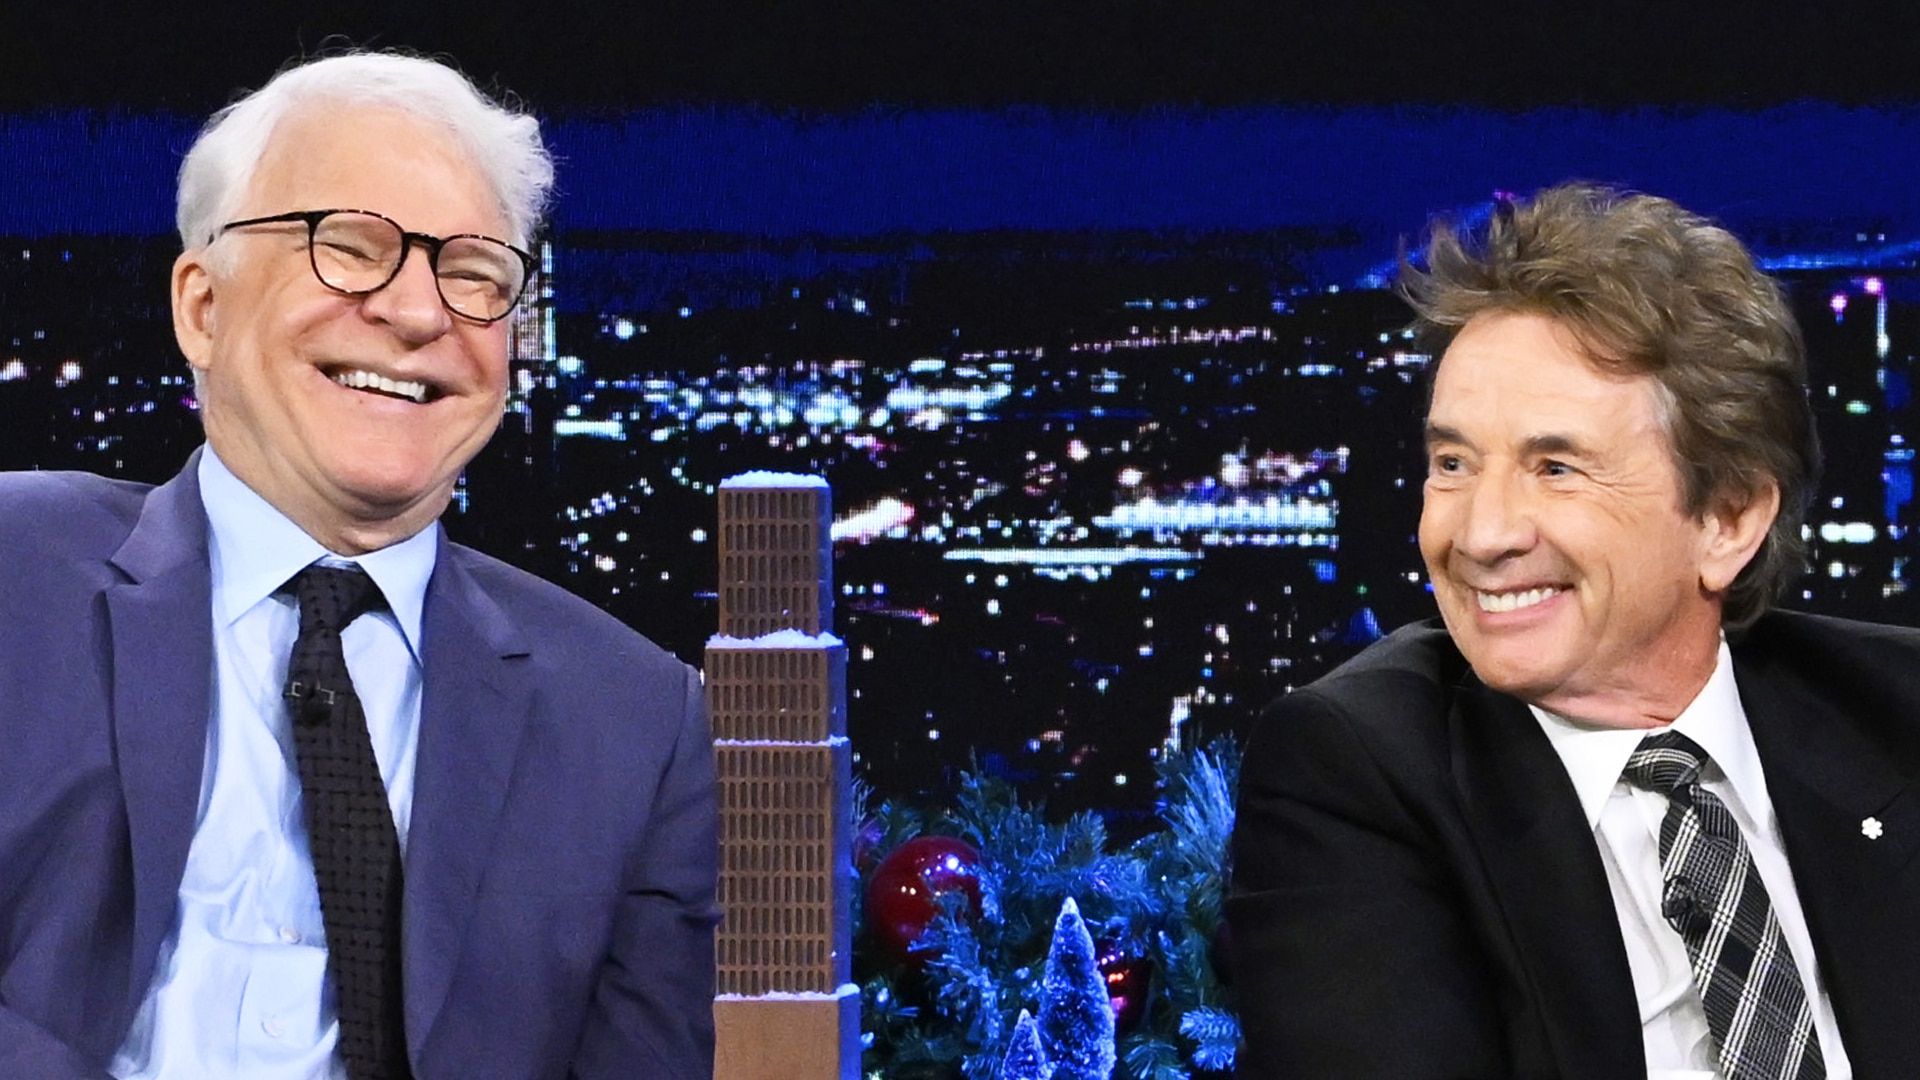 Steve Martin and Martin Short: You Won't Believe What They Look